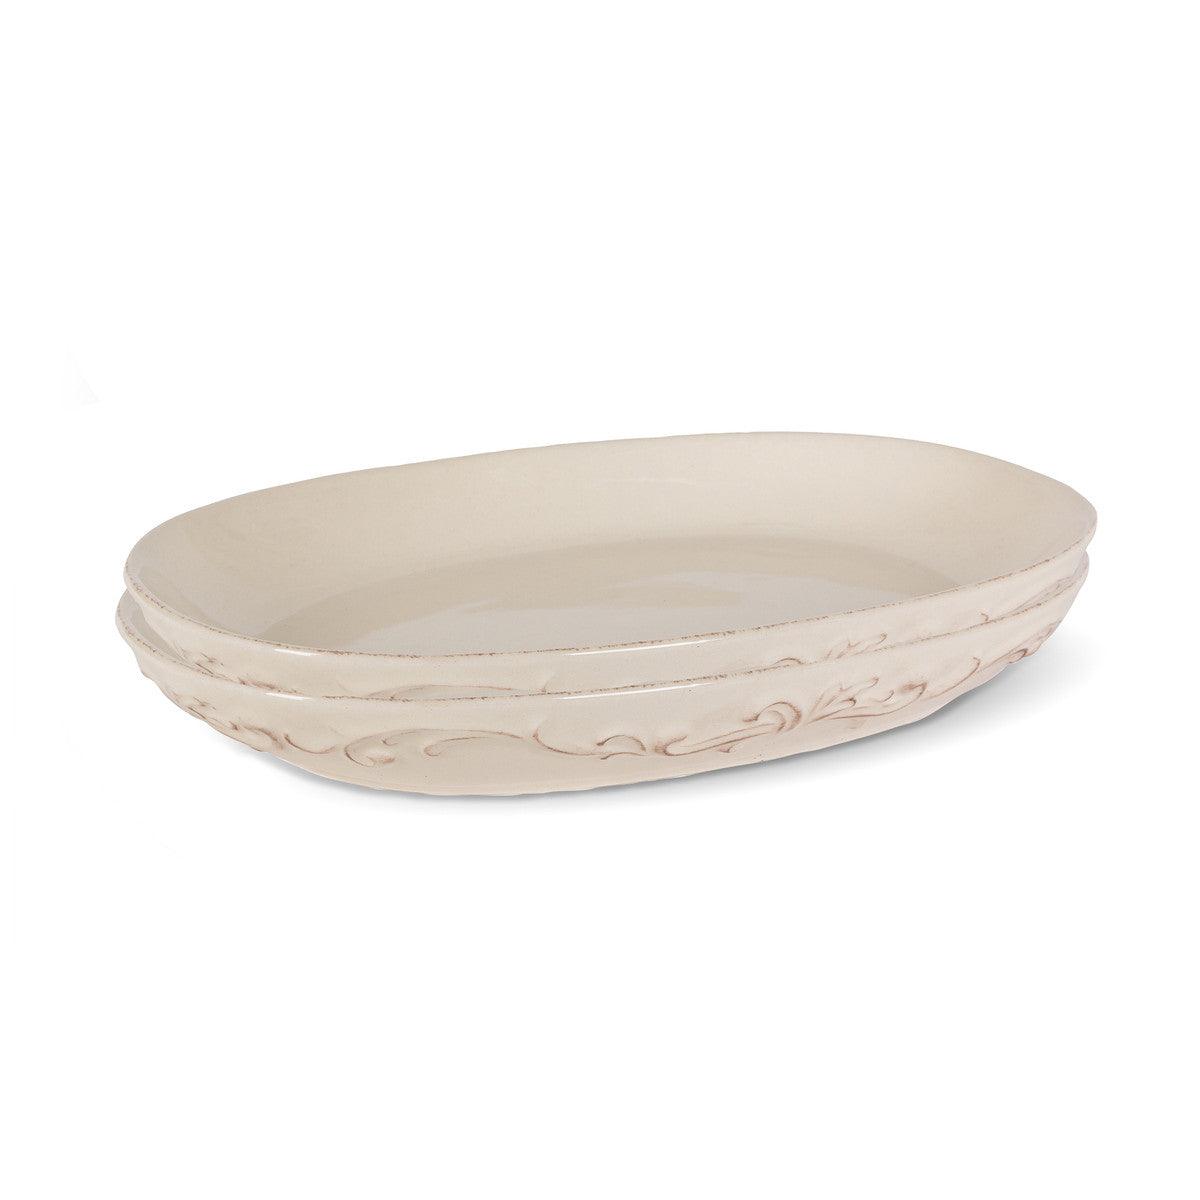 Acanthus Stoneware Oval Serving Platters, Set of 2 - Signastyle Boutique